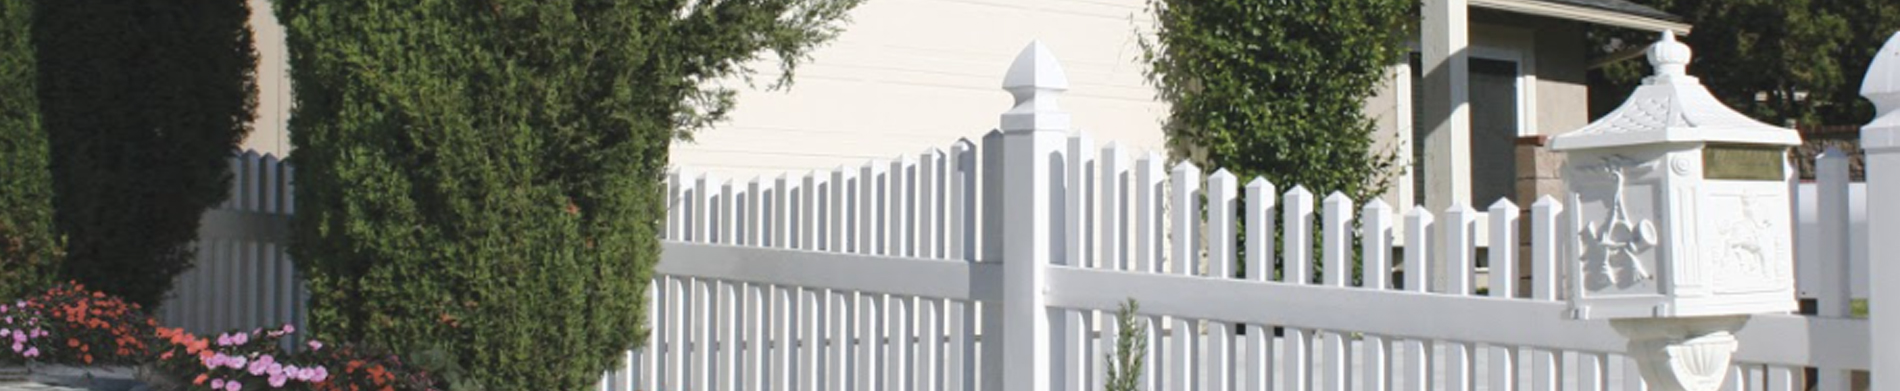 Installing a vinyl fence panel during the winter season